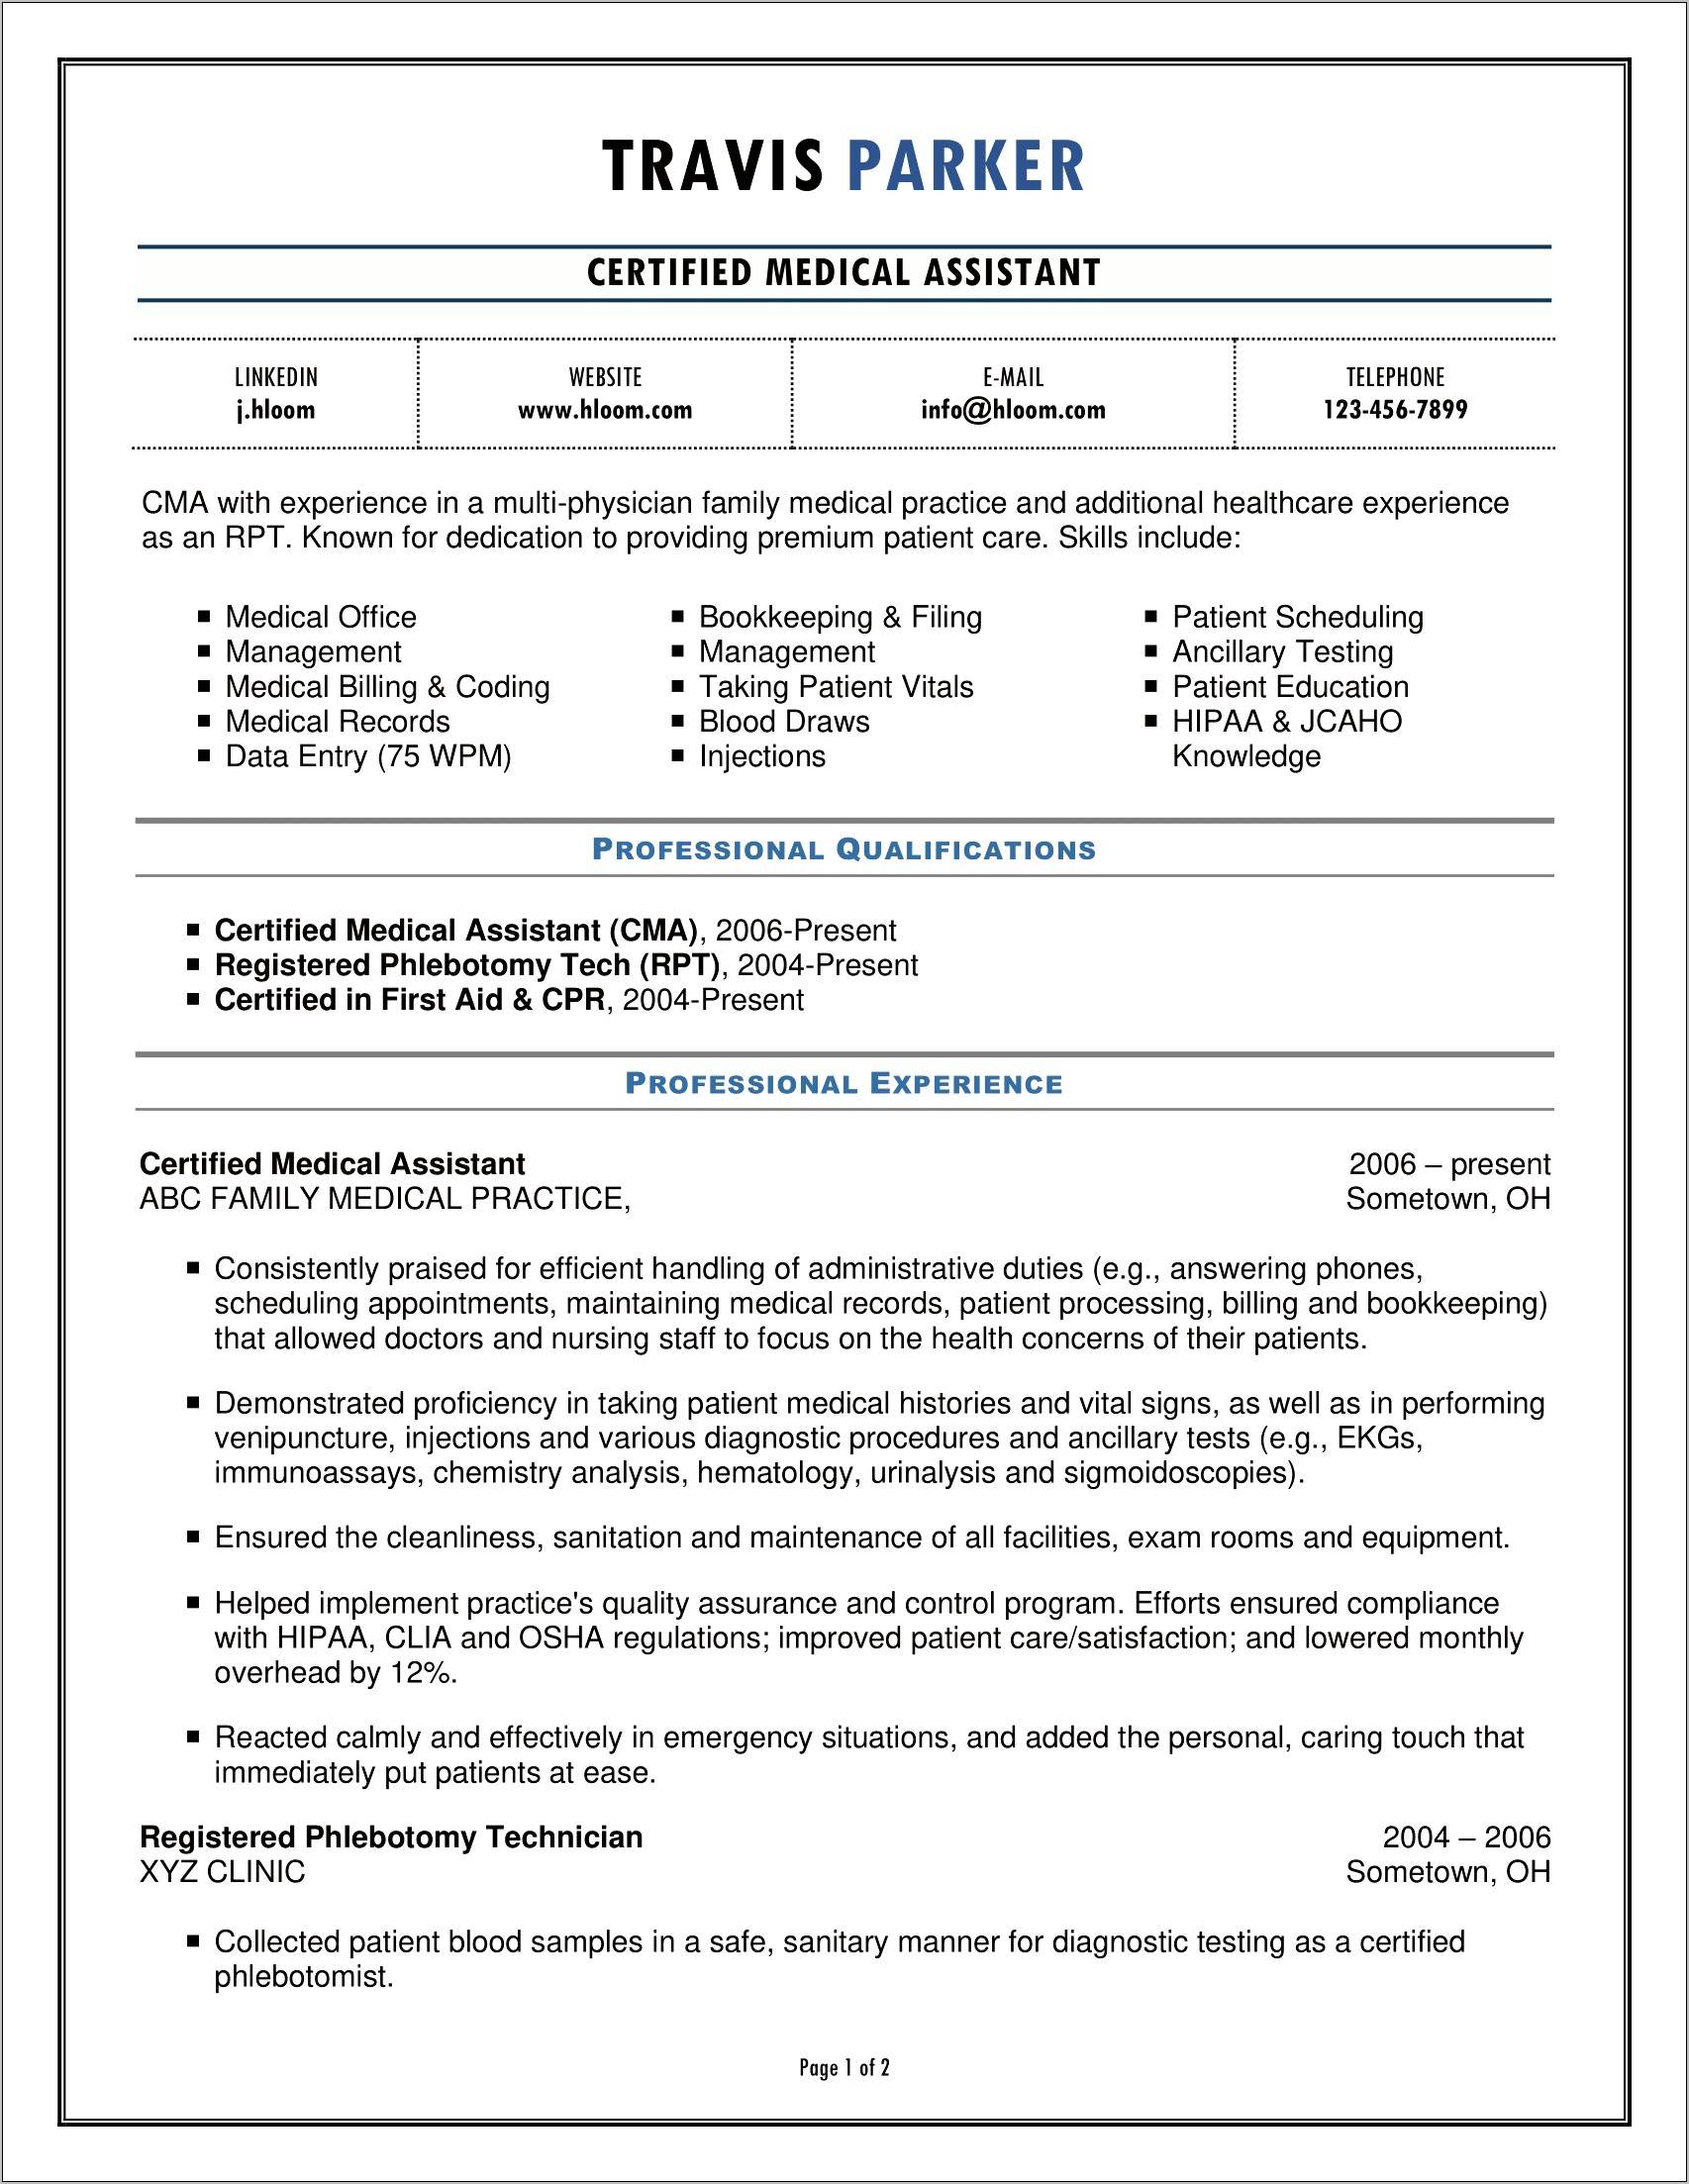 Sample Resume For Medical Billing With No Experience